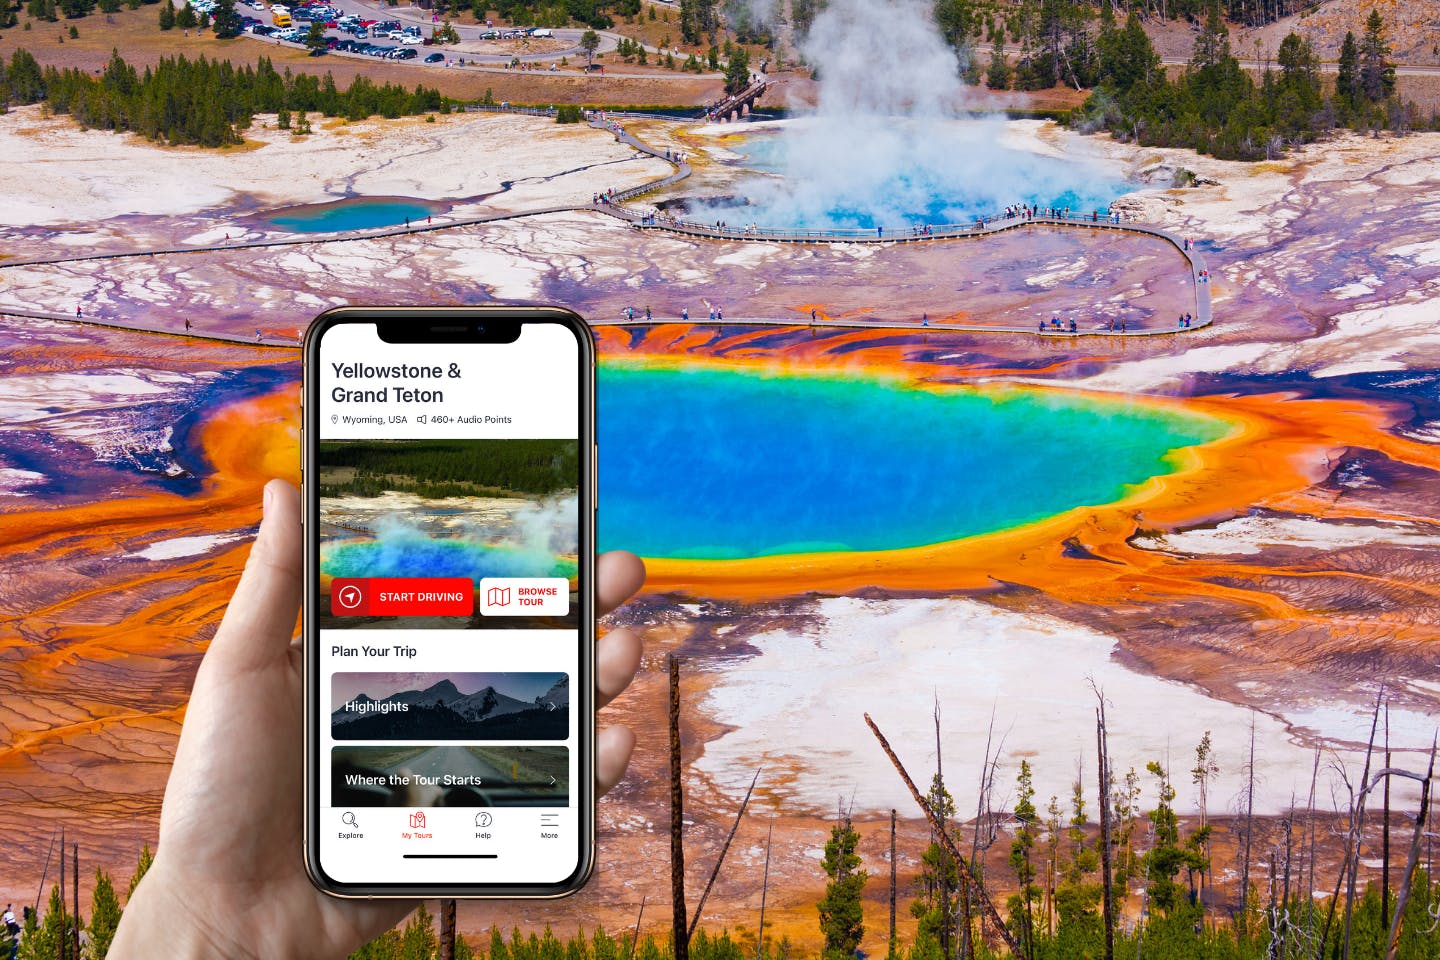 Audio-guided driving tour of Yellowstone and Grand Teton